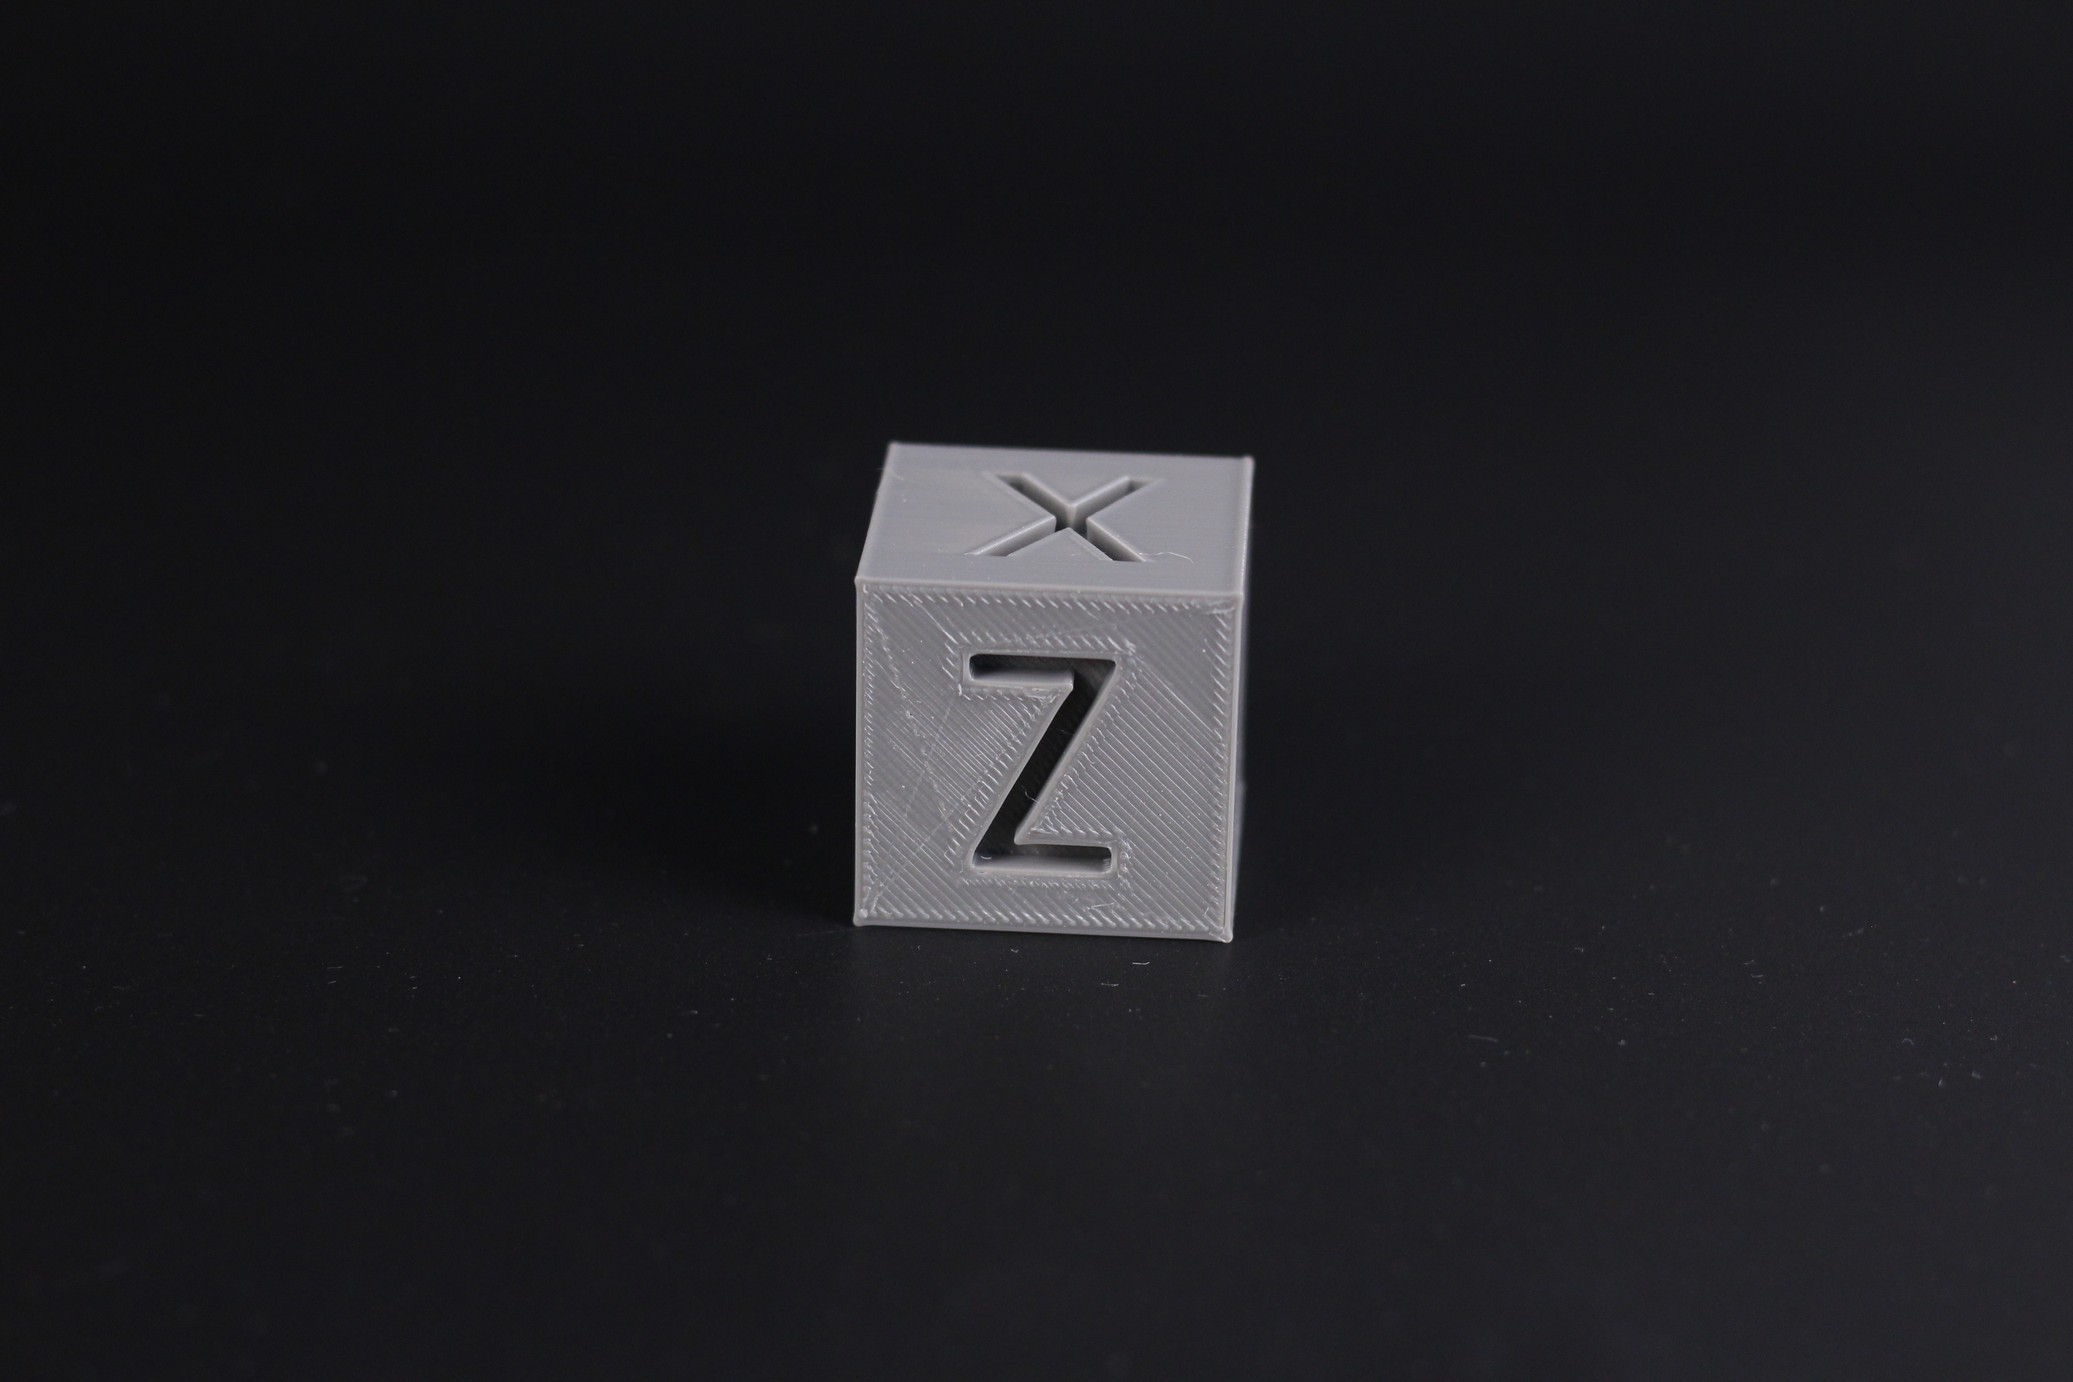 Anycubic Kobra 200 calibration cube 3 | Anycubic Kobra Review: The New Budget Standard